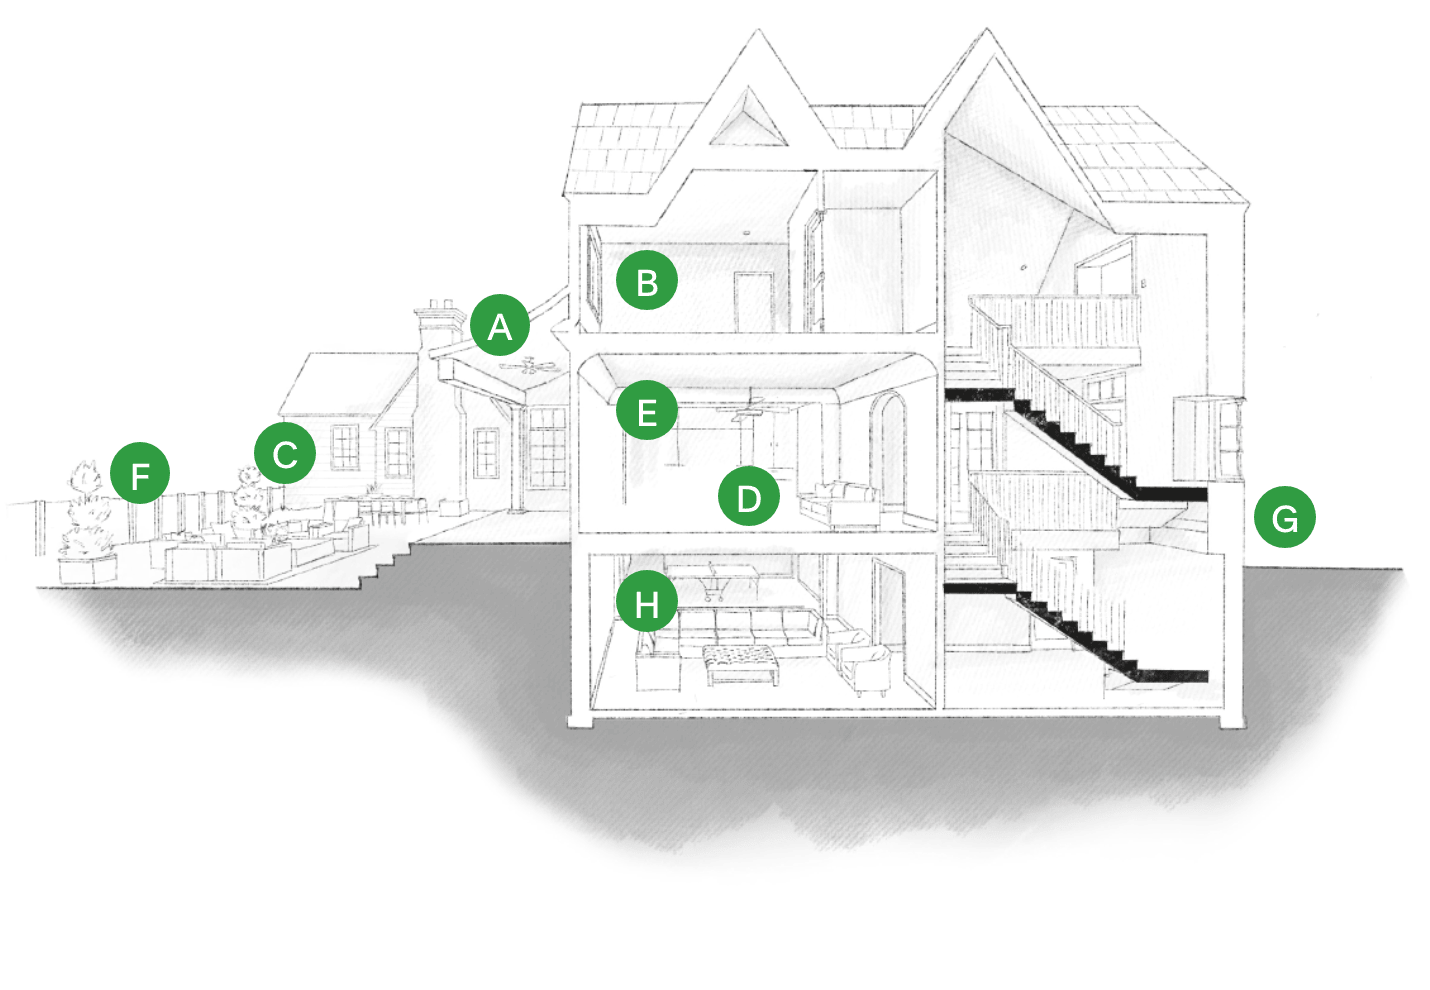 House diagram showing areas treated